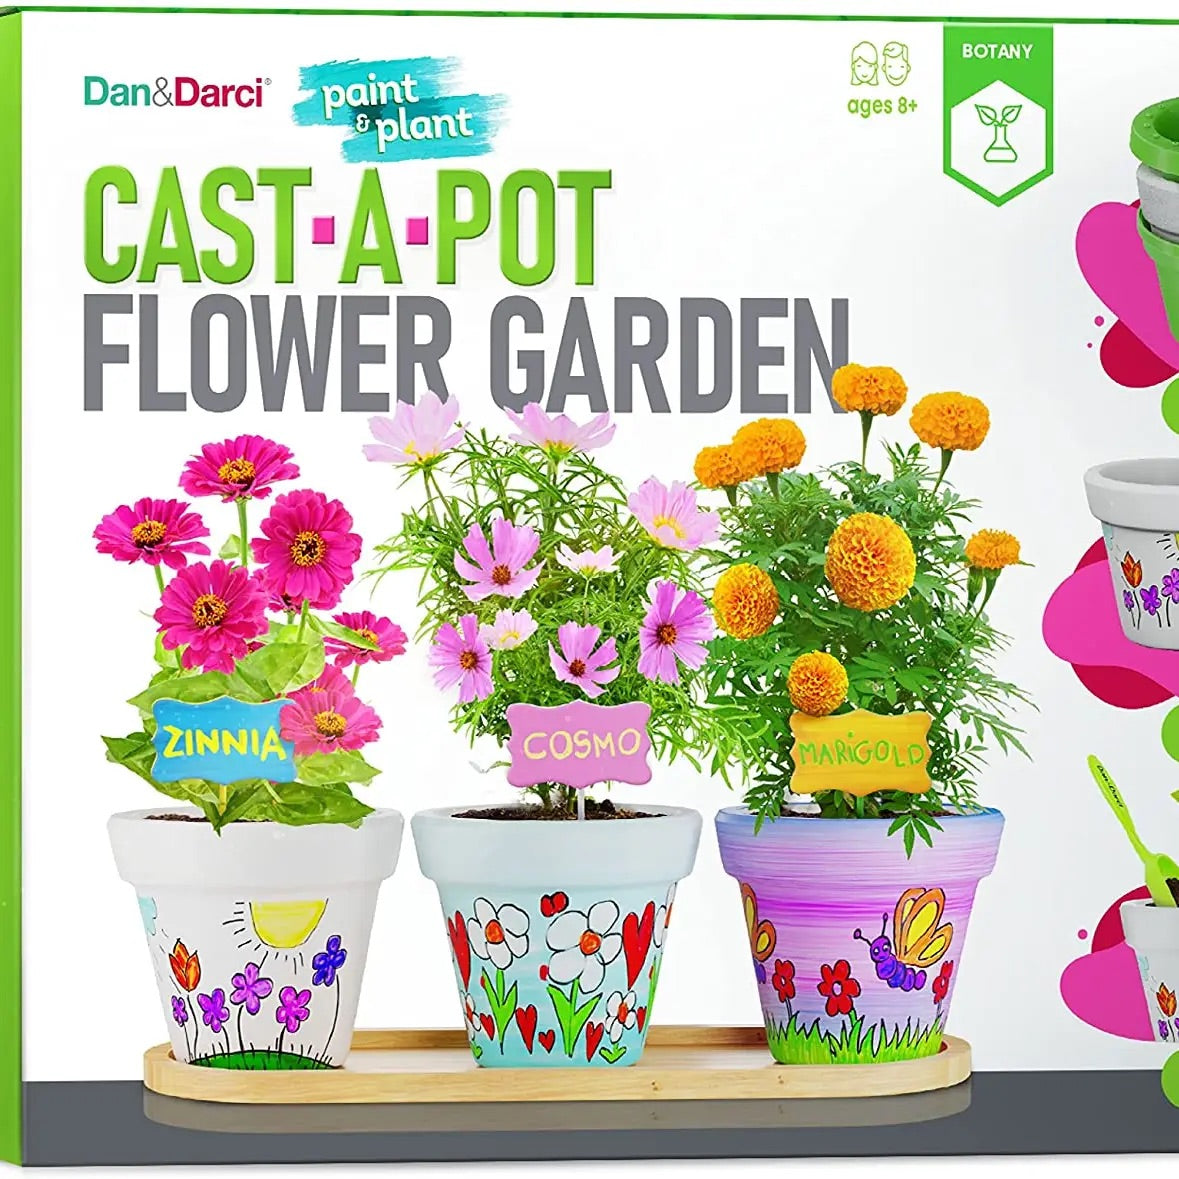 Paint & plant your own small garden. Grow Cosmos, Zinnia, and Marigold flowers.